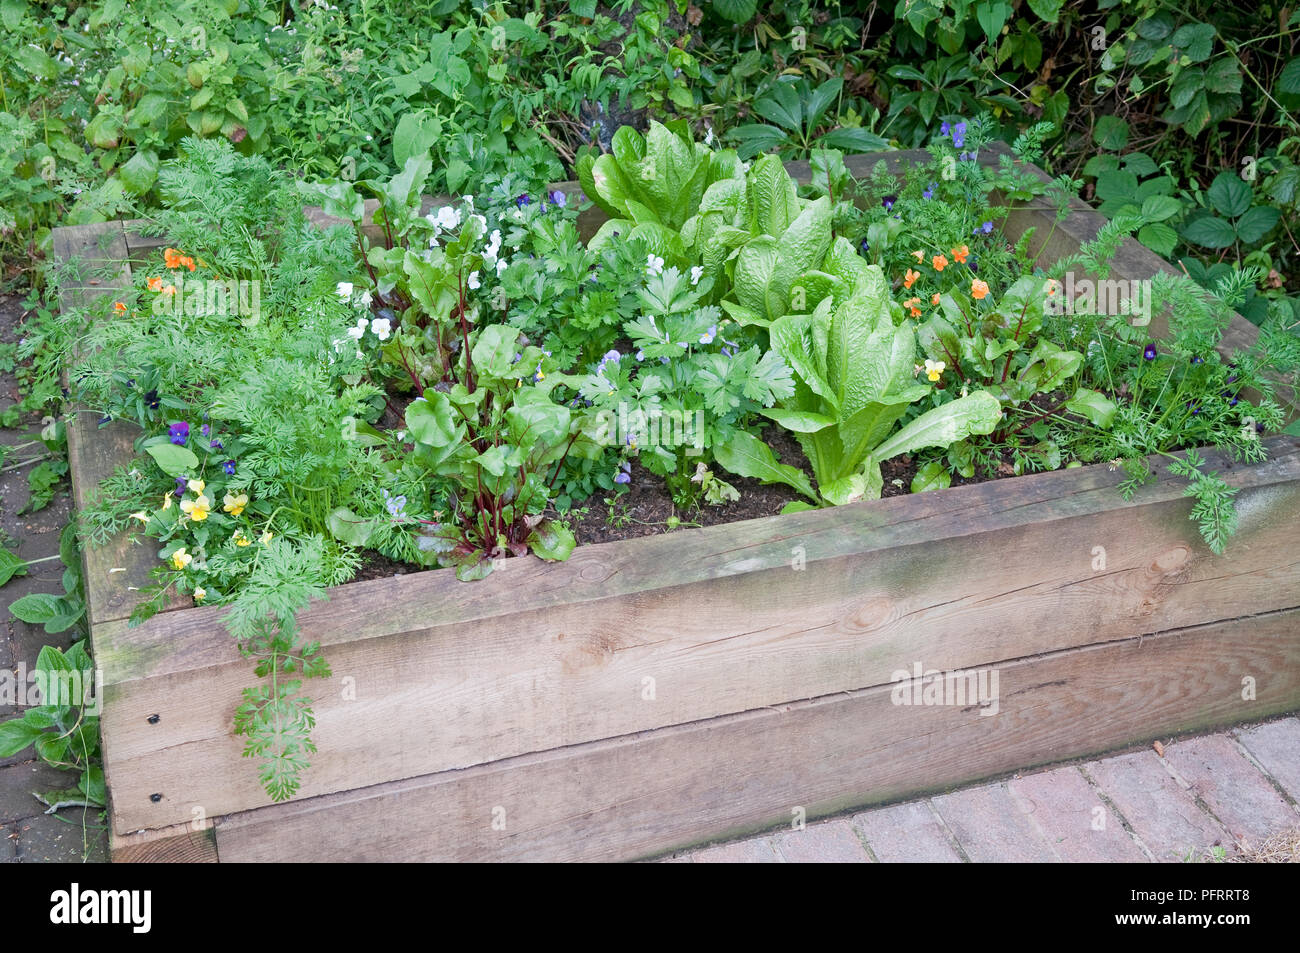 Raised bed of lettuce, radish, violas, and parsley in domestic graden, close-up Stock Photo